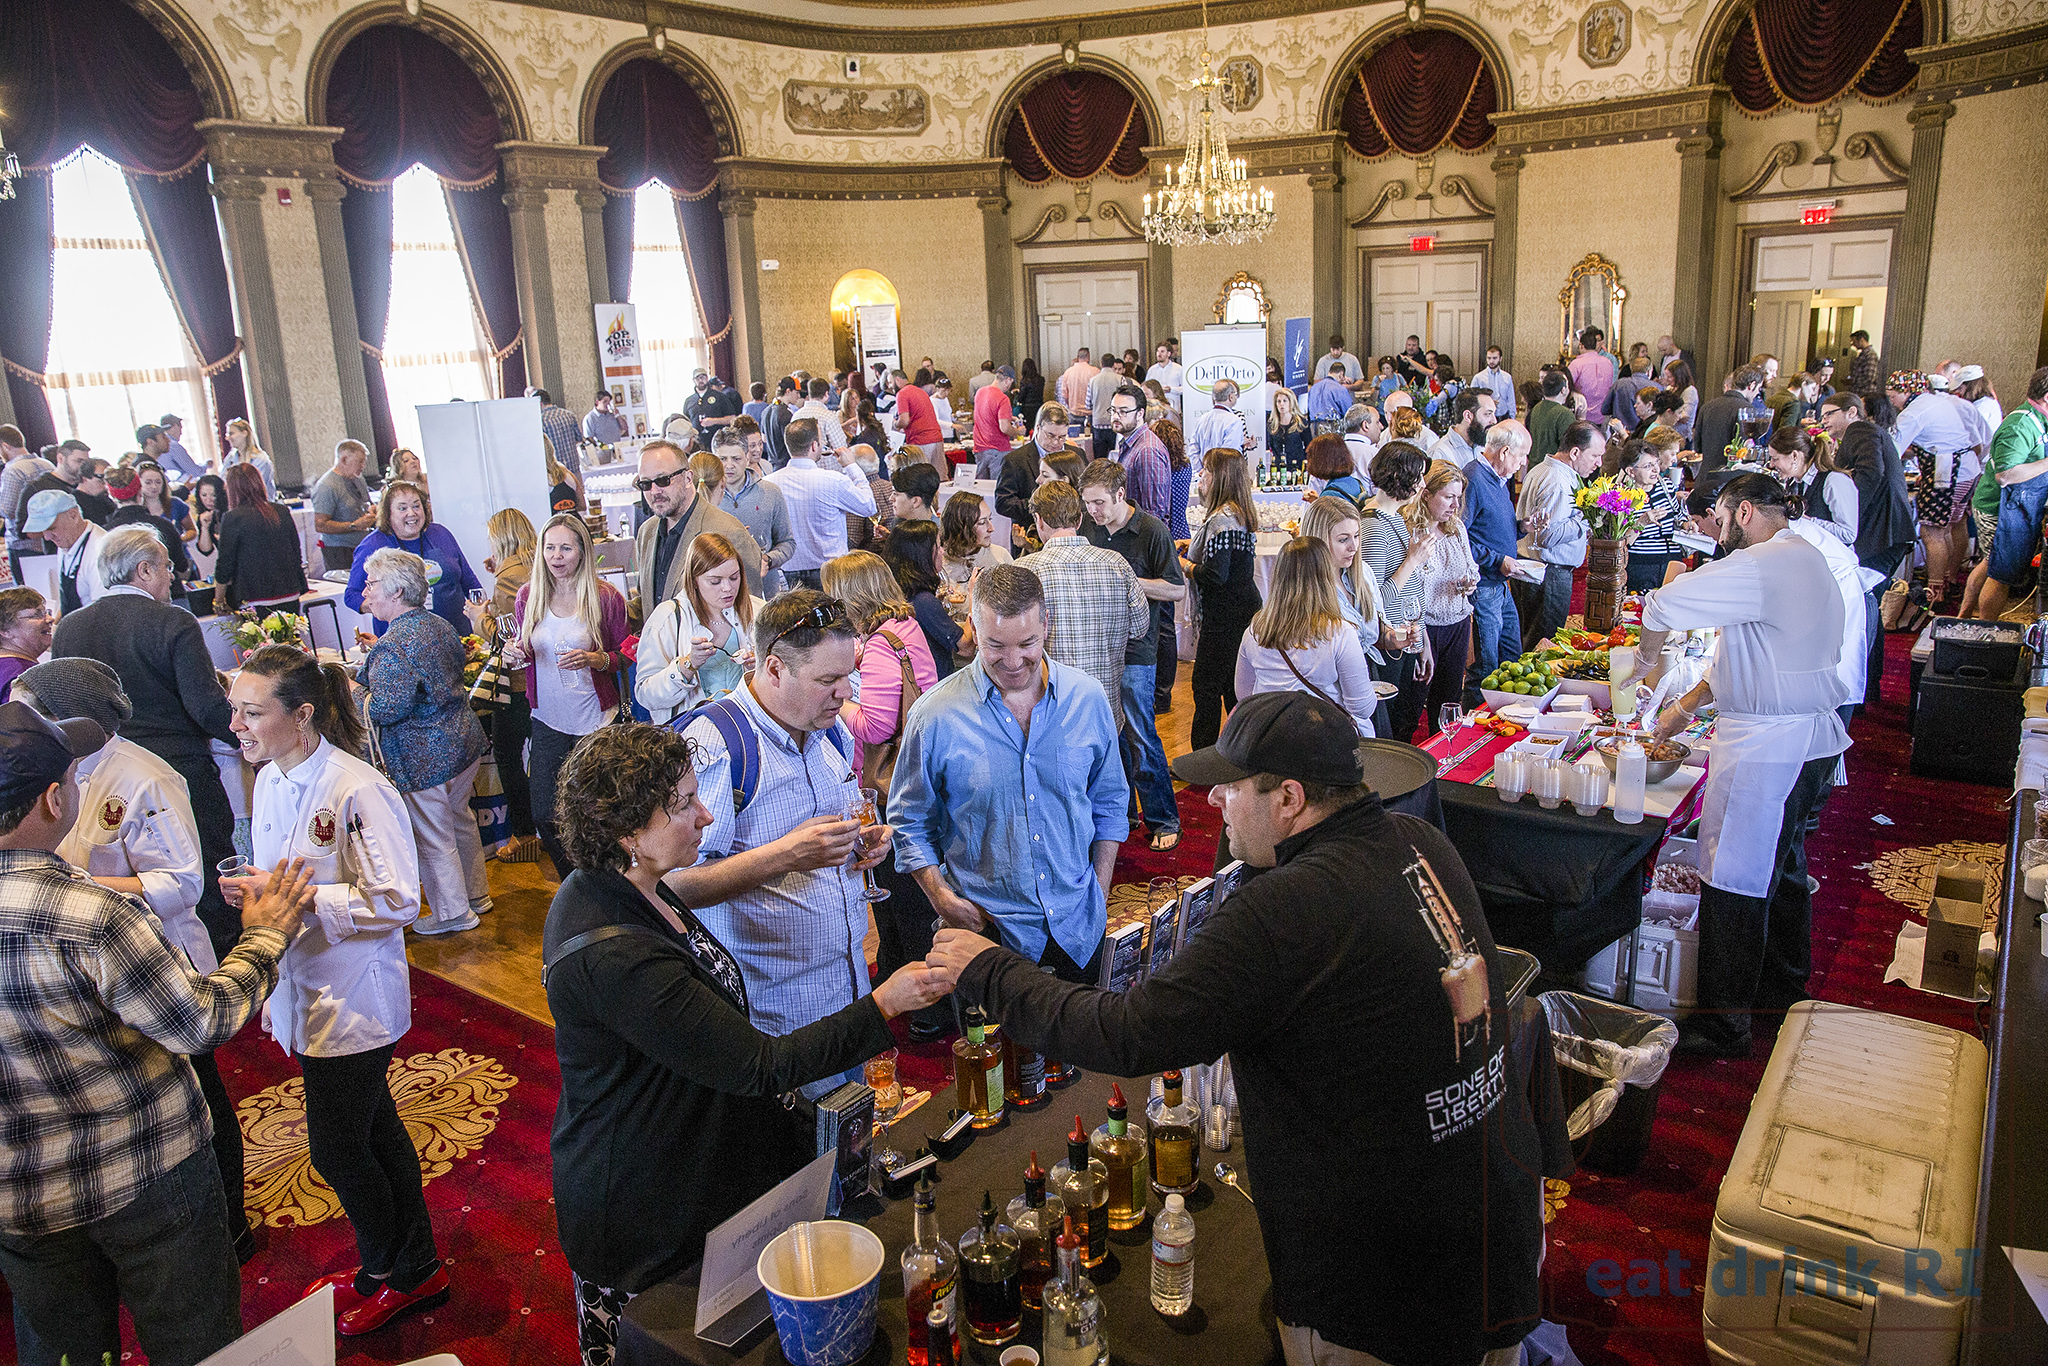 Eat Drink RI Festival returns to Providence April 28 – May 1